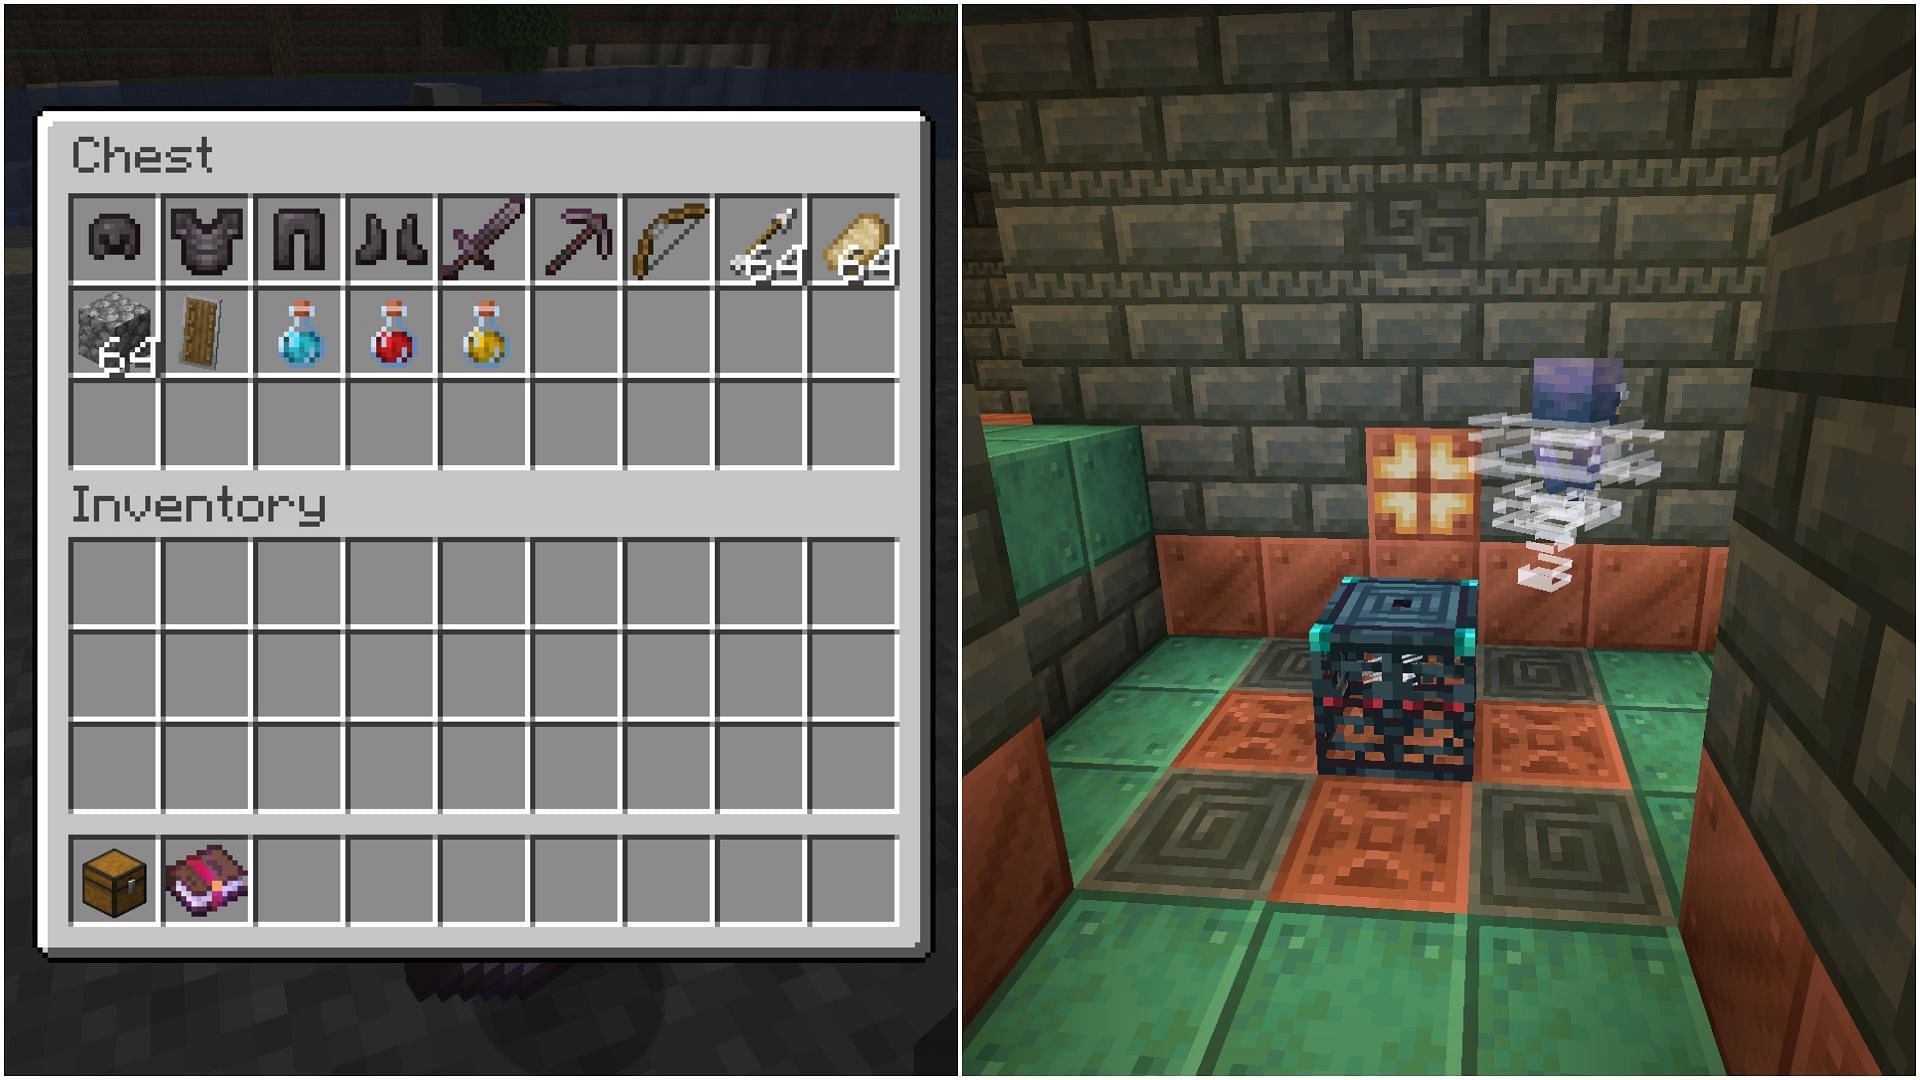 You must always prepare before entering a trial chamber in Minecraft (Image via Mojang Studios)